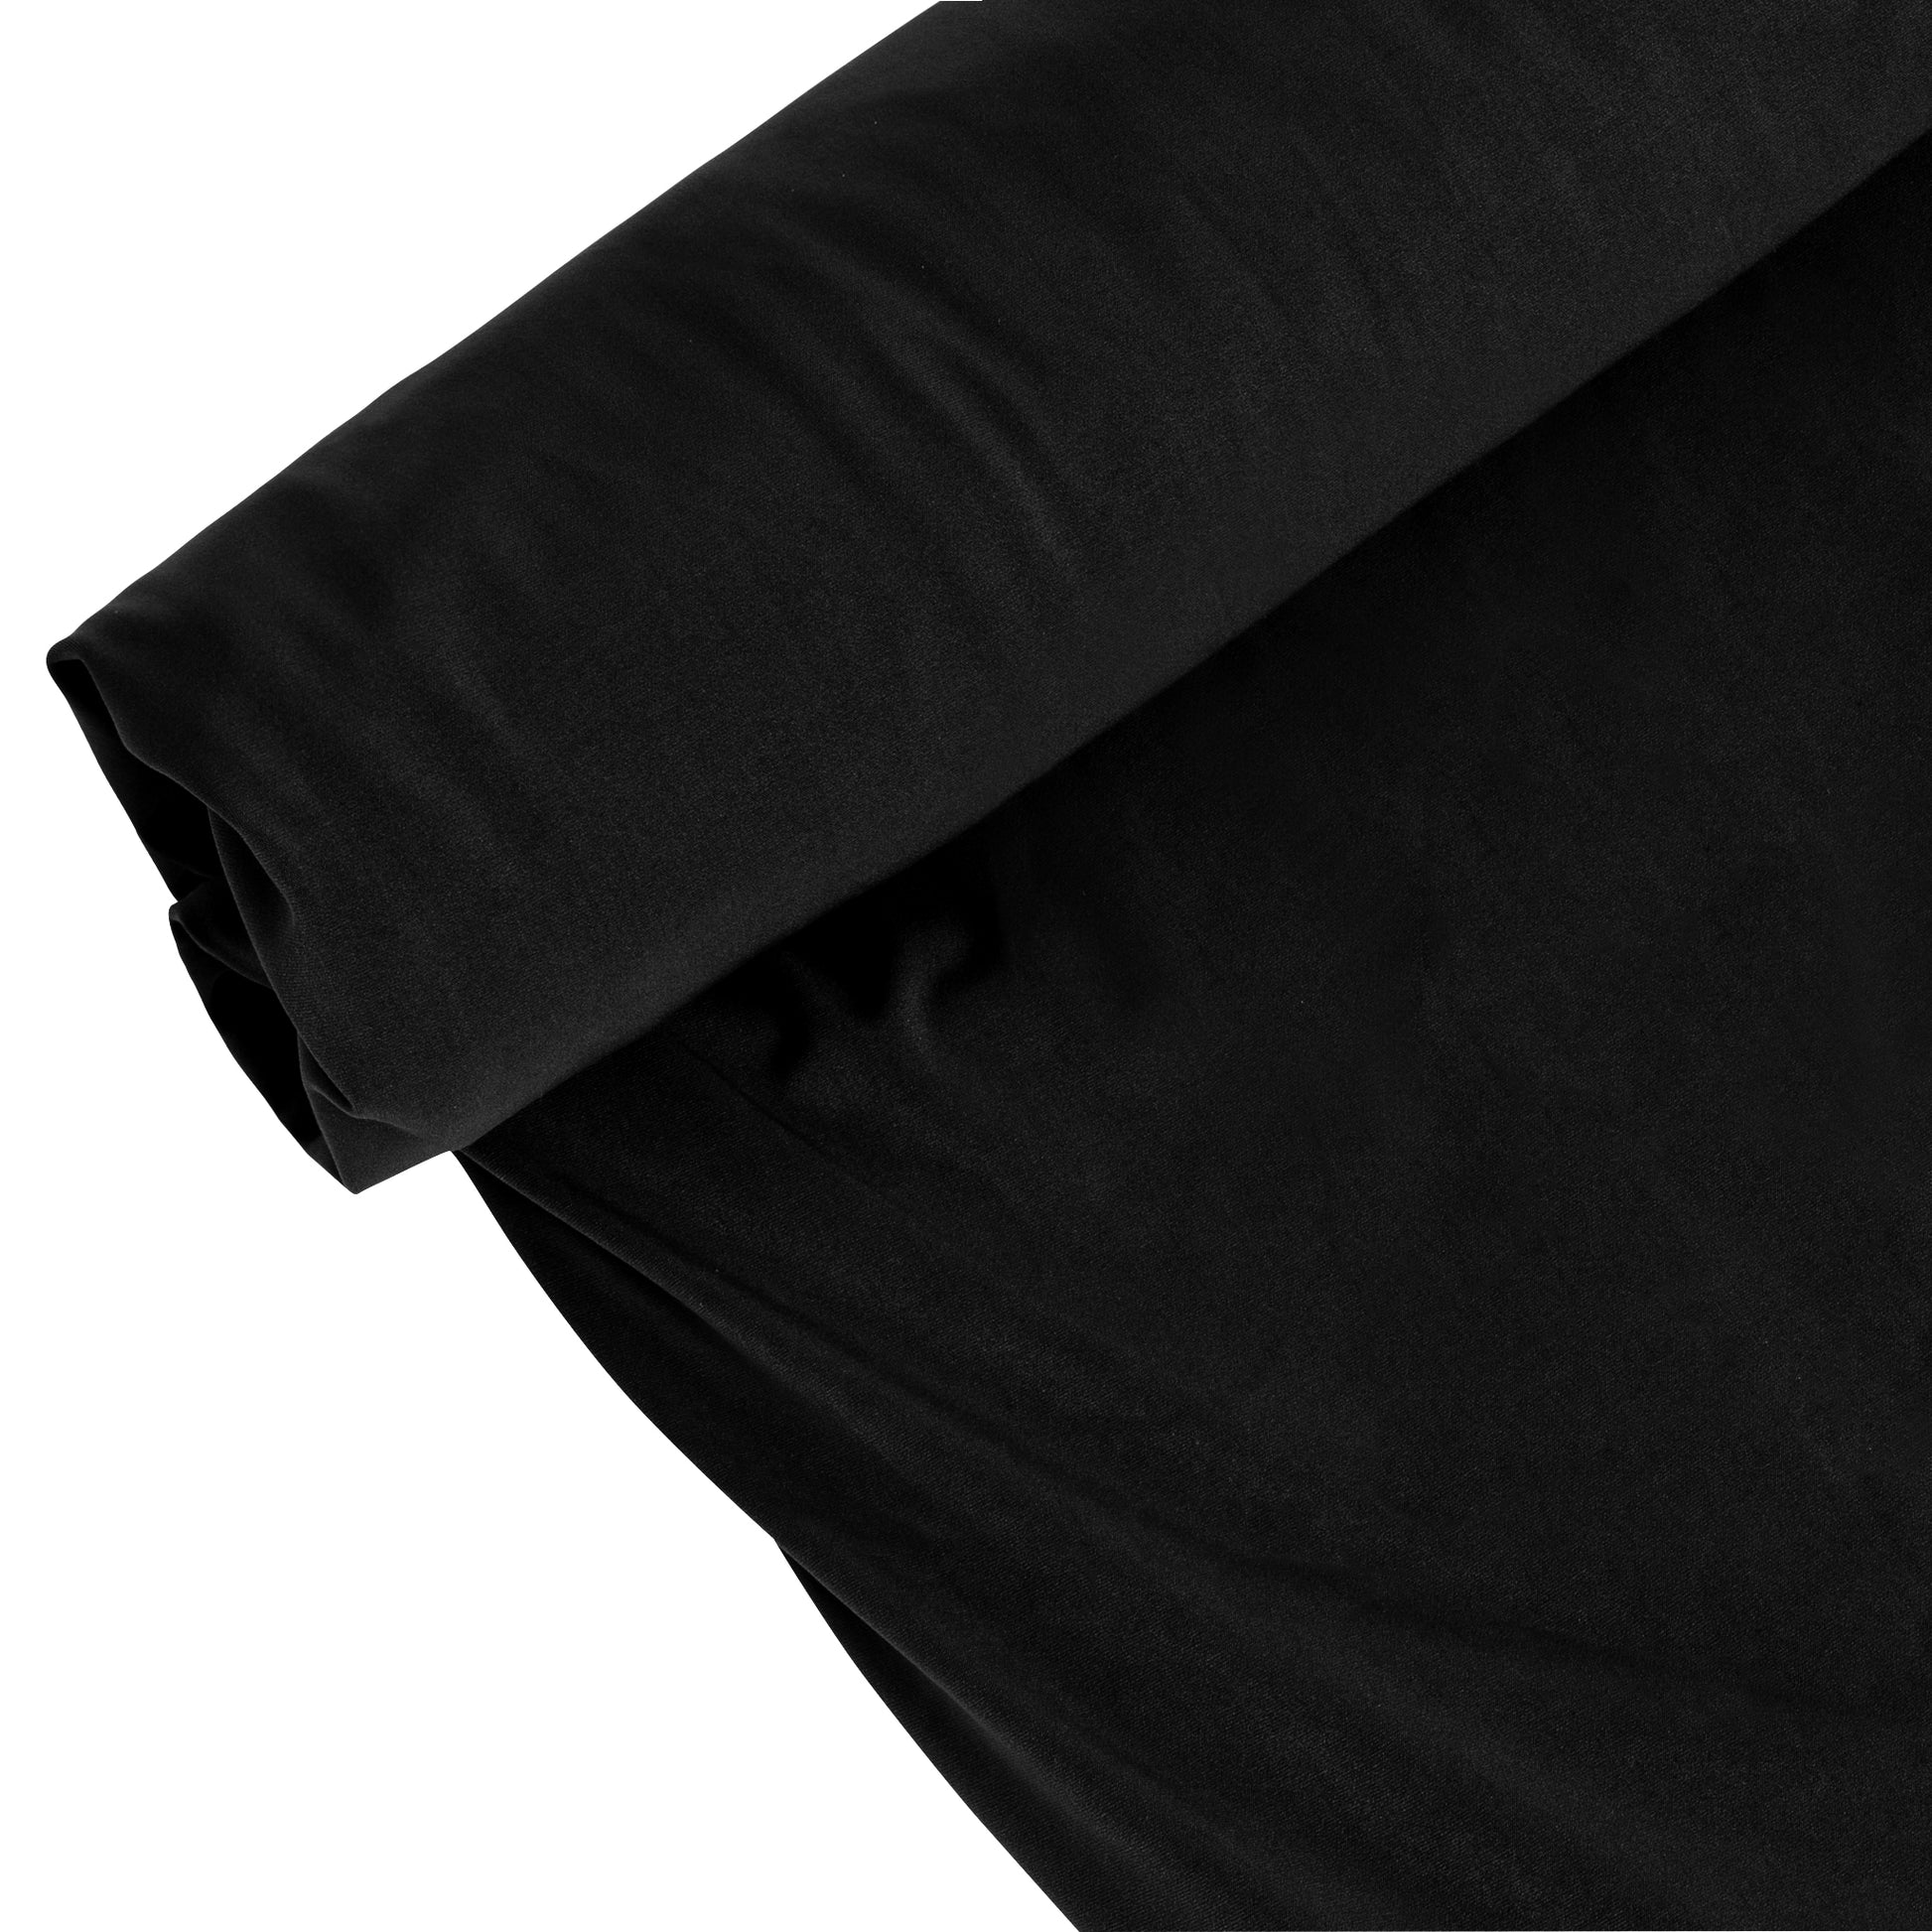 Wholesale 60 Polyester Lining Fabric Black 175 Yard Roll